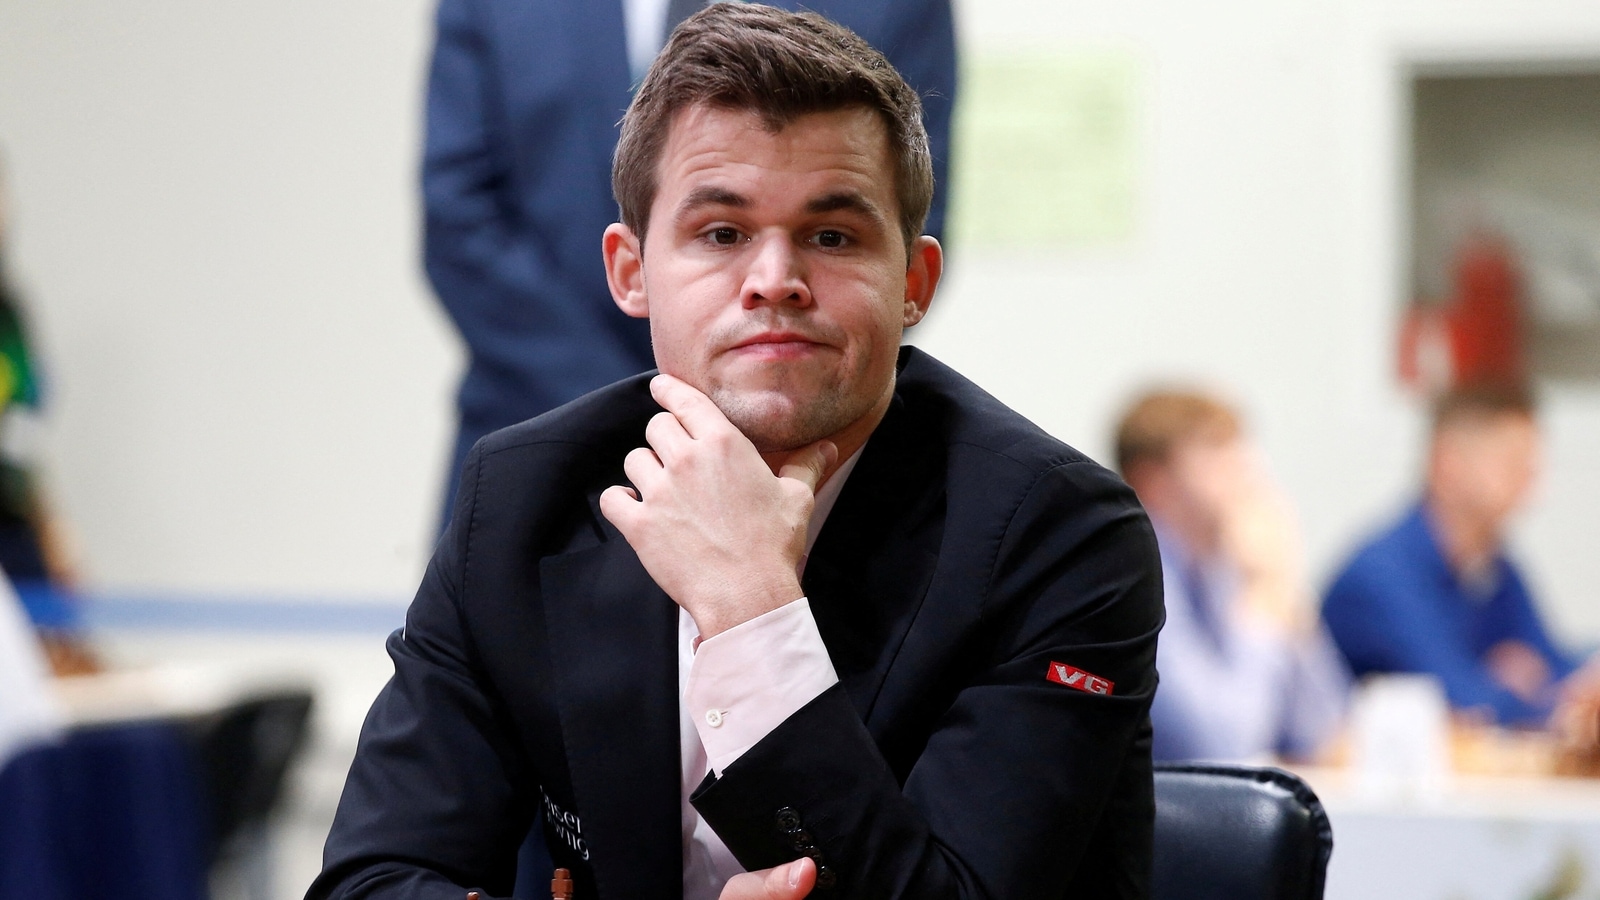 Magnus Carlsen will not defend his World Chess Championship title in